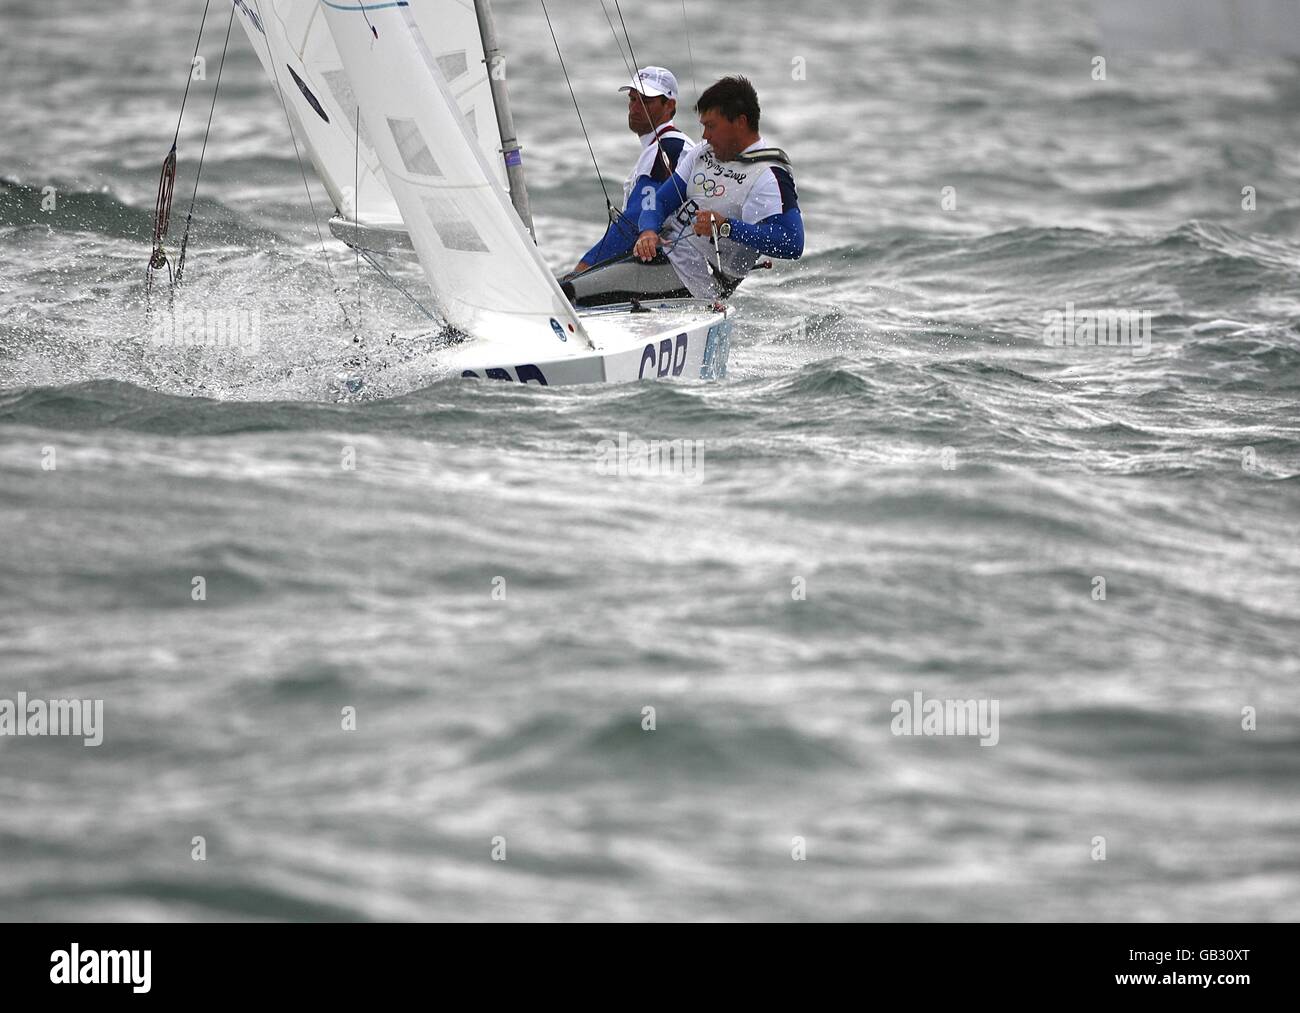 Great Britain's duo of Iain Percy and Andrew Simpson sail in the final race of the men's Star class at the Olympic Games' Sailing Centre in Qingdao on day 13 of the 2008 Olympic Games in Beijing. Stock Photo